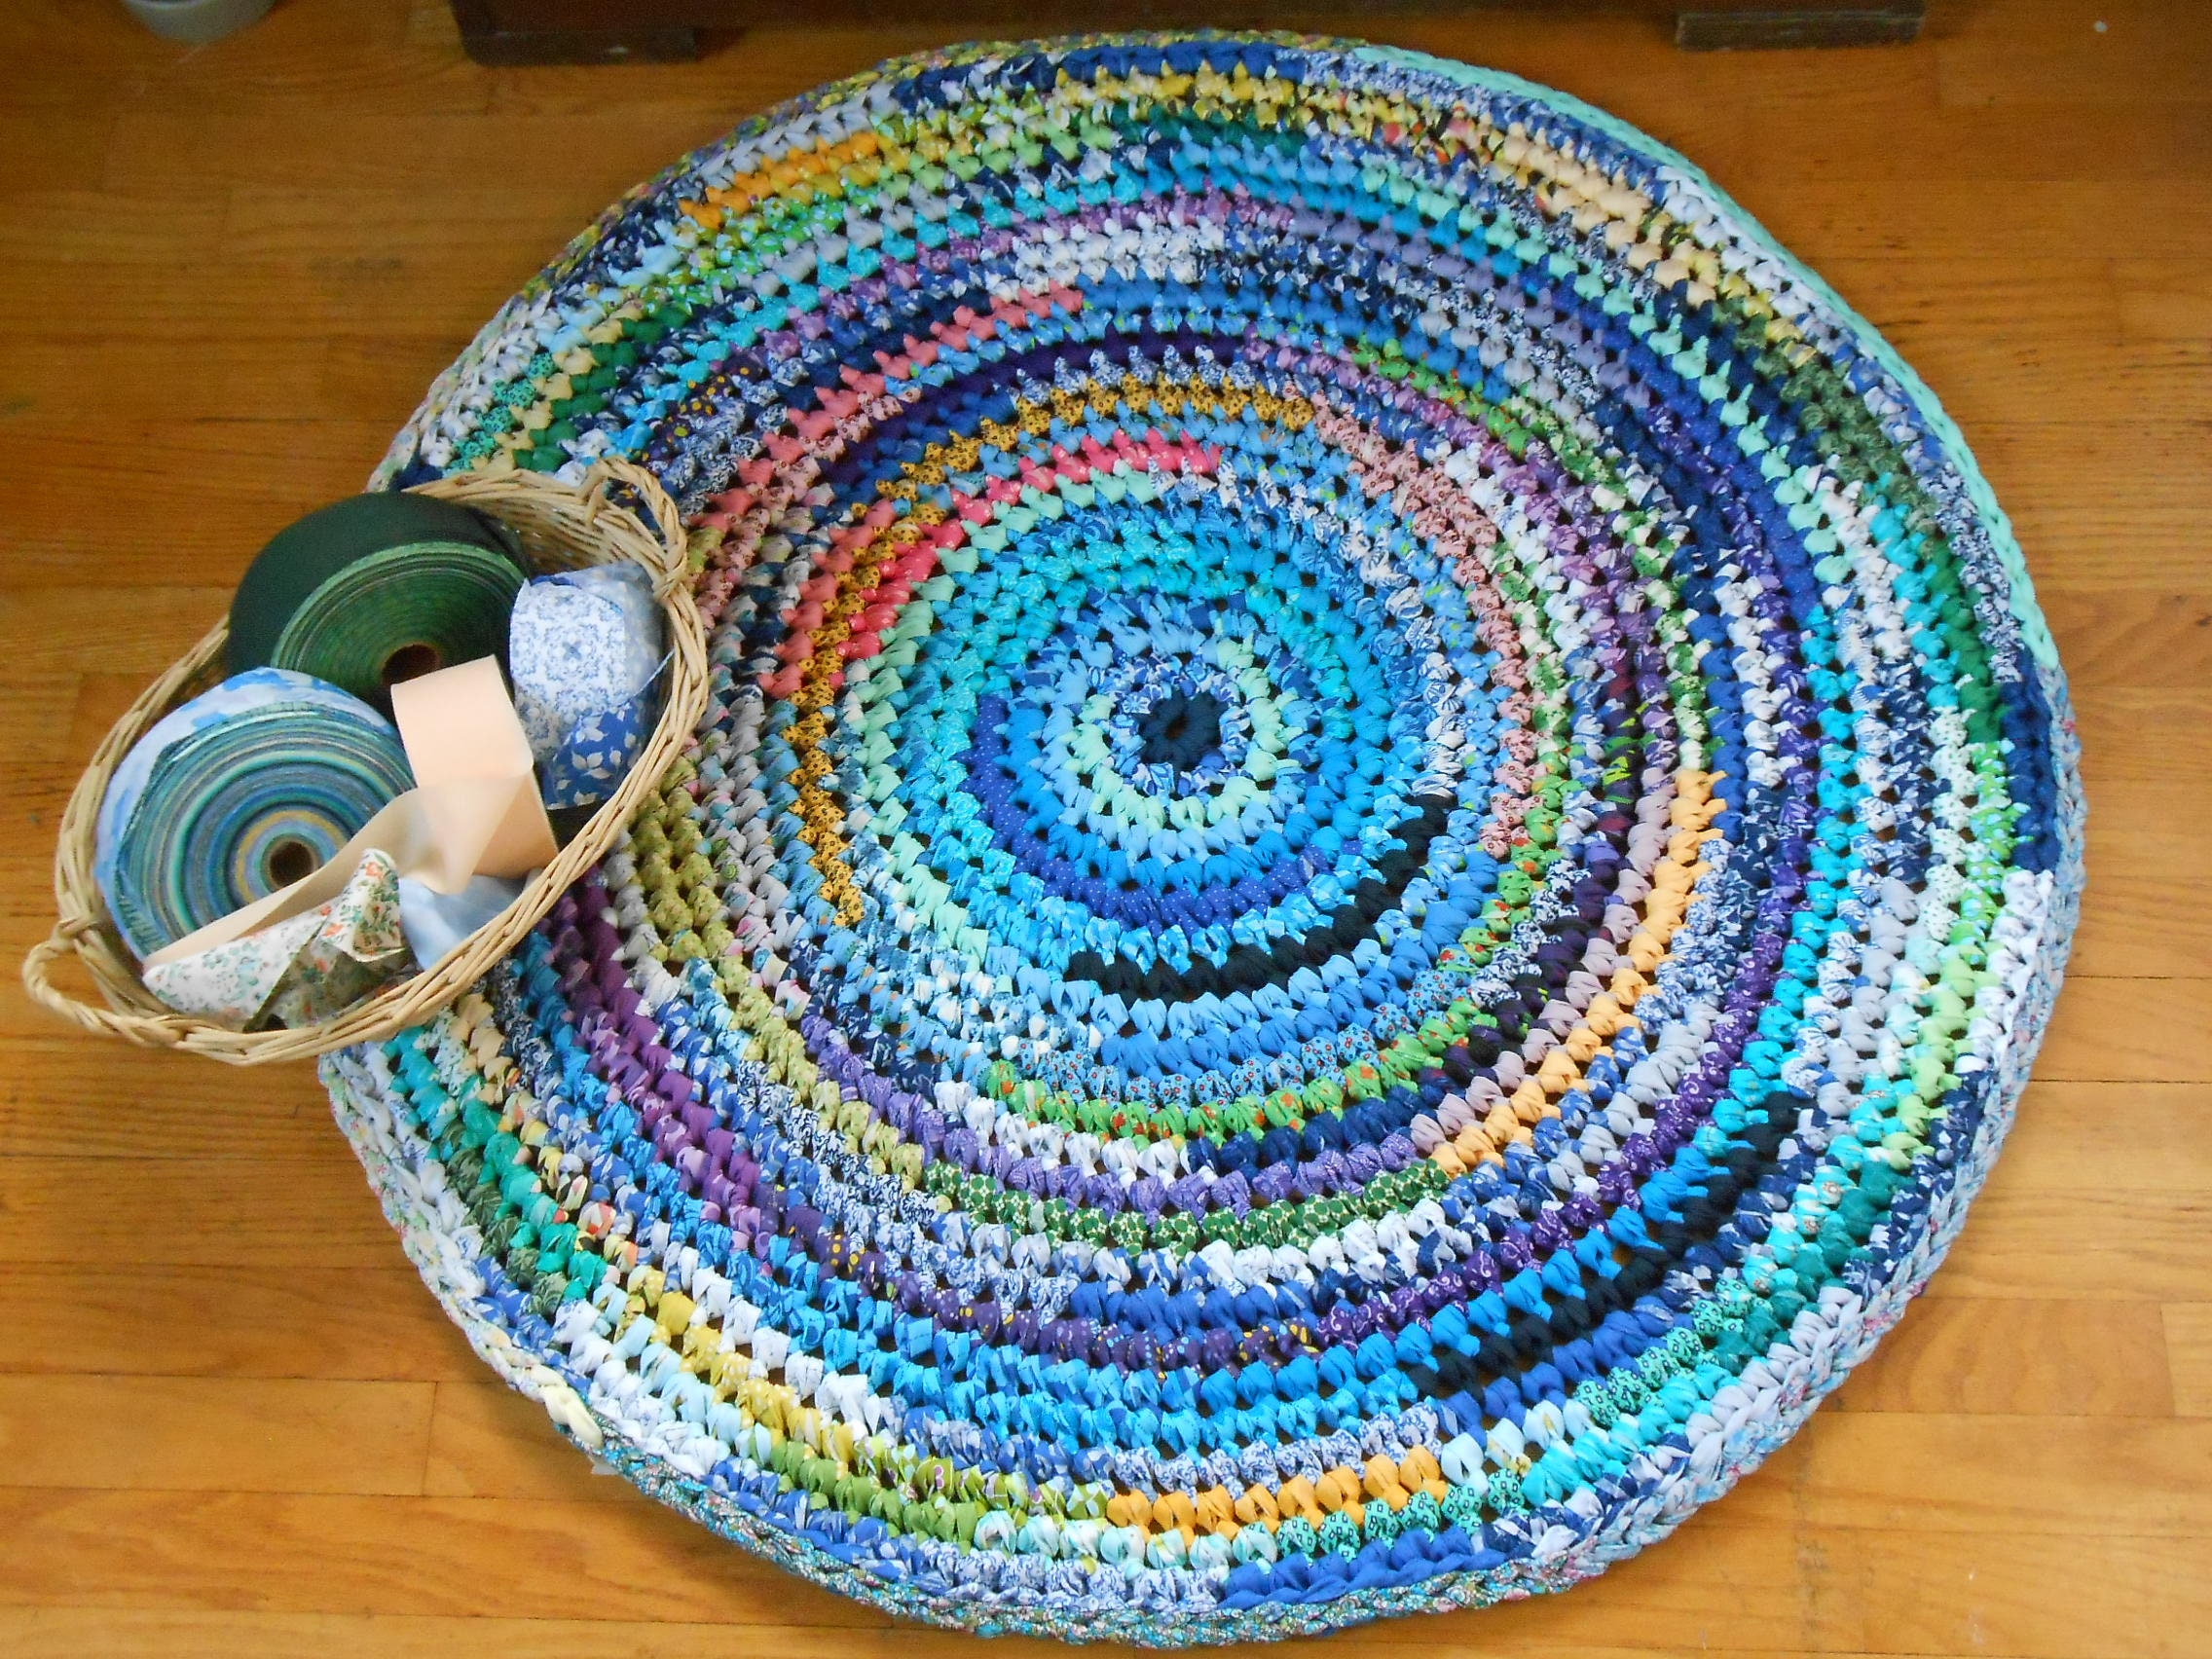 Buy Handmade Large Dark Brown Oval Crochet Rug With Yellow Stripes, made to  order from PinkLove